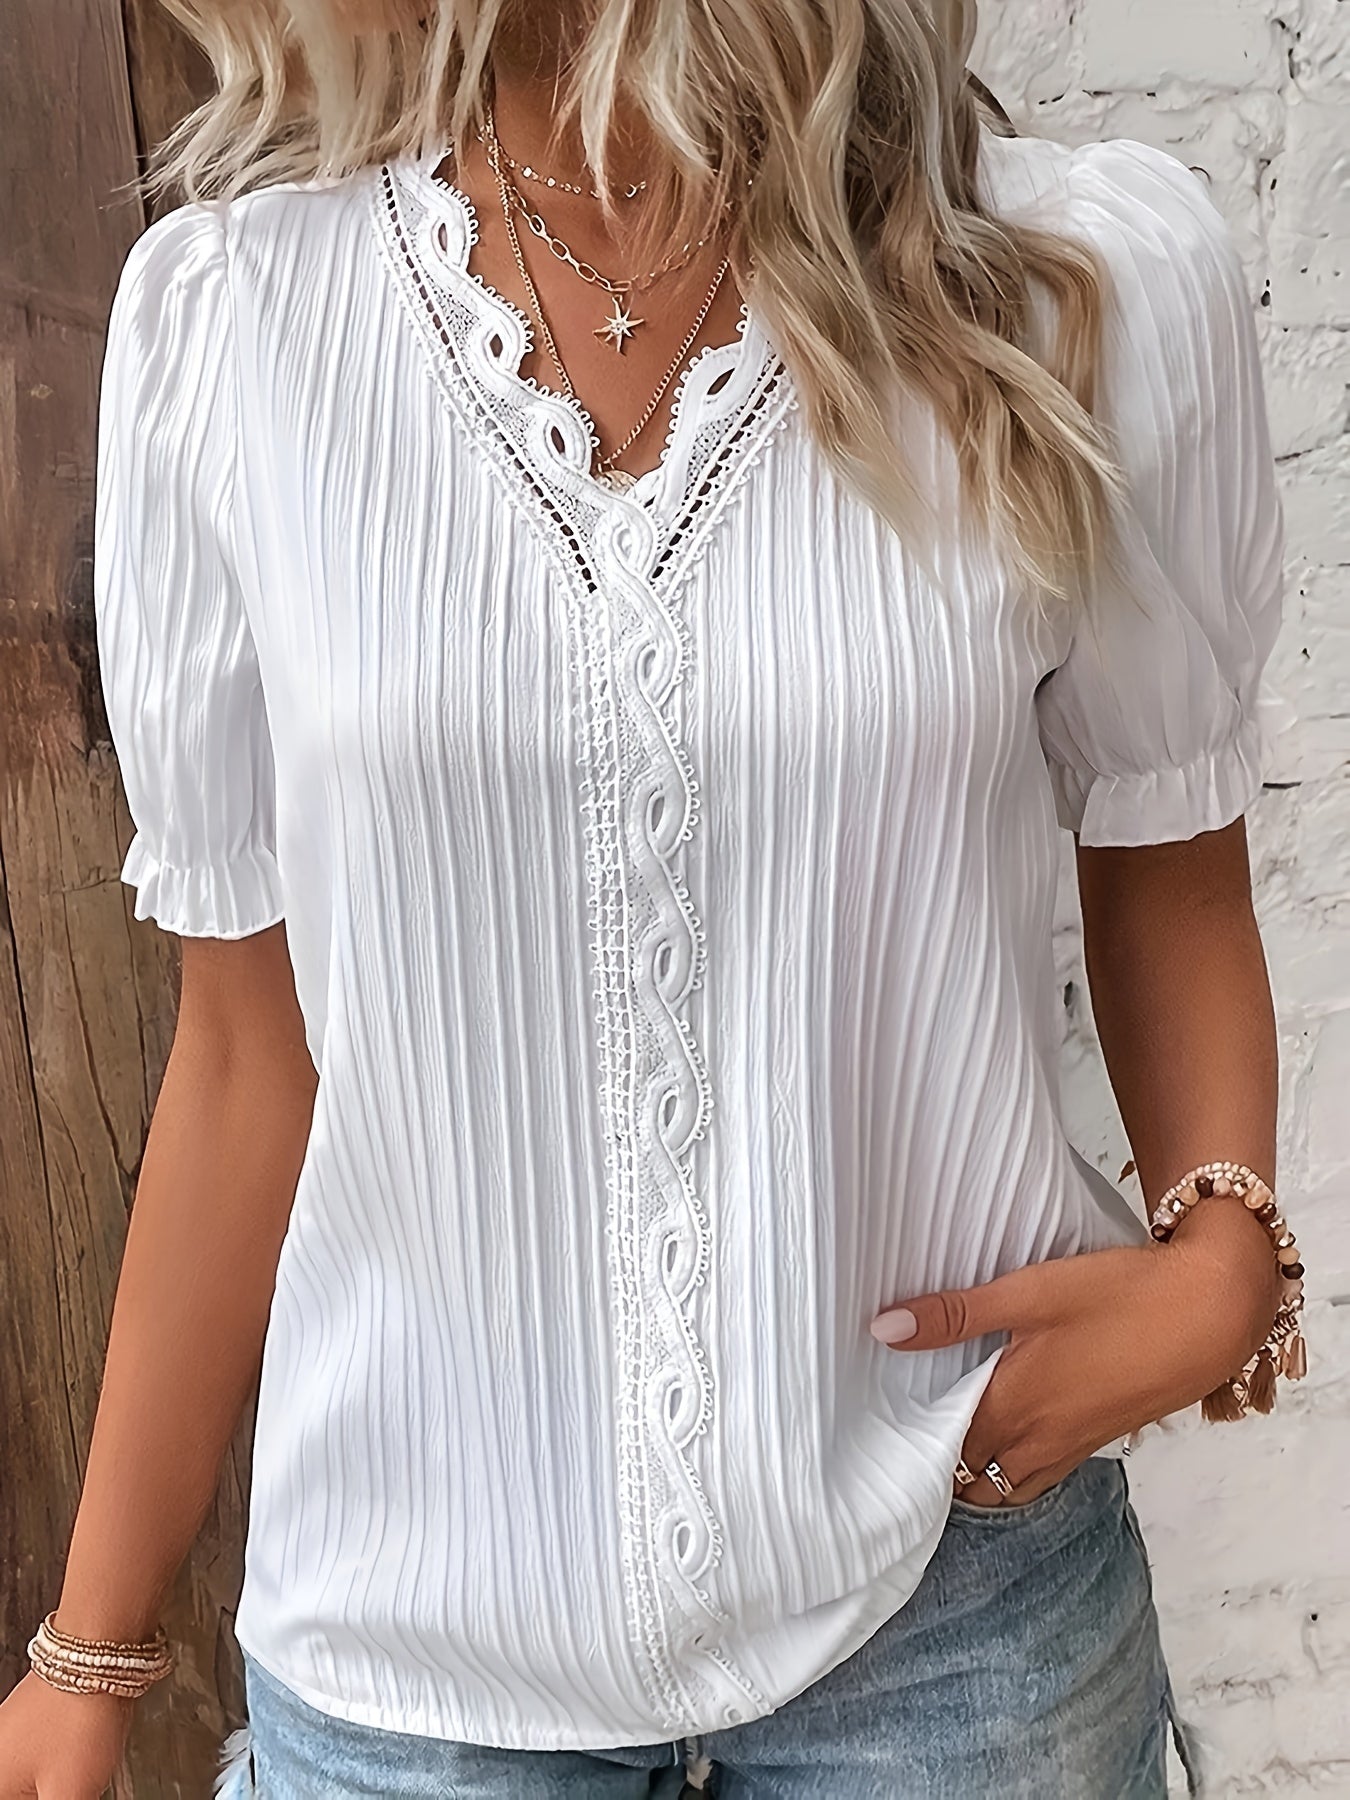 Plus Size Elegant Blouse, Women's Plus Solid Contrast Lace Ribbed Puff Sleeve V Neck Shirt Top